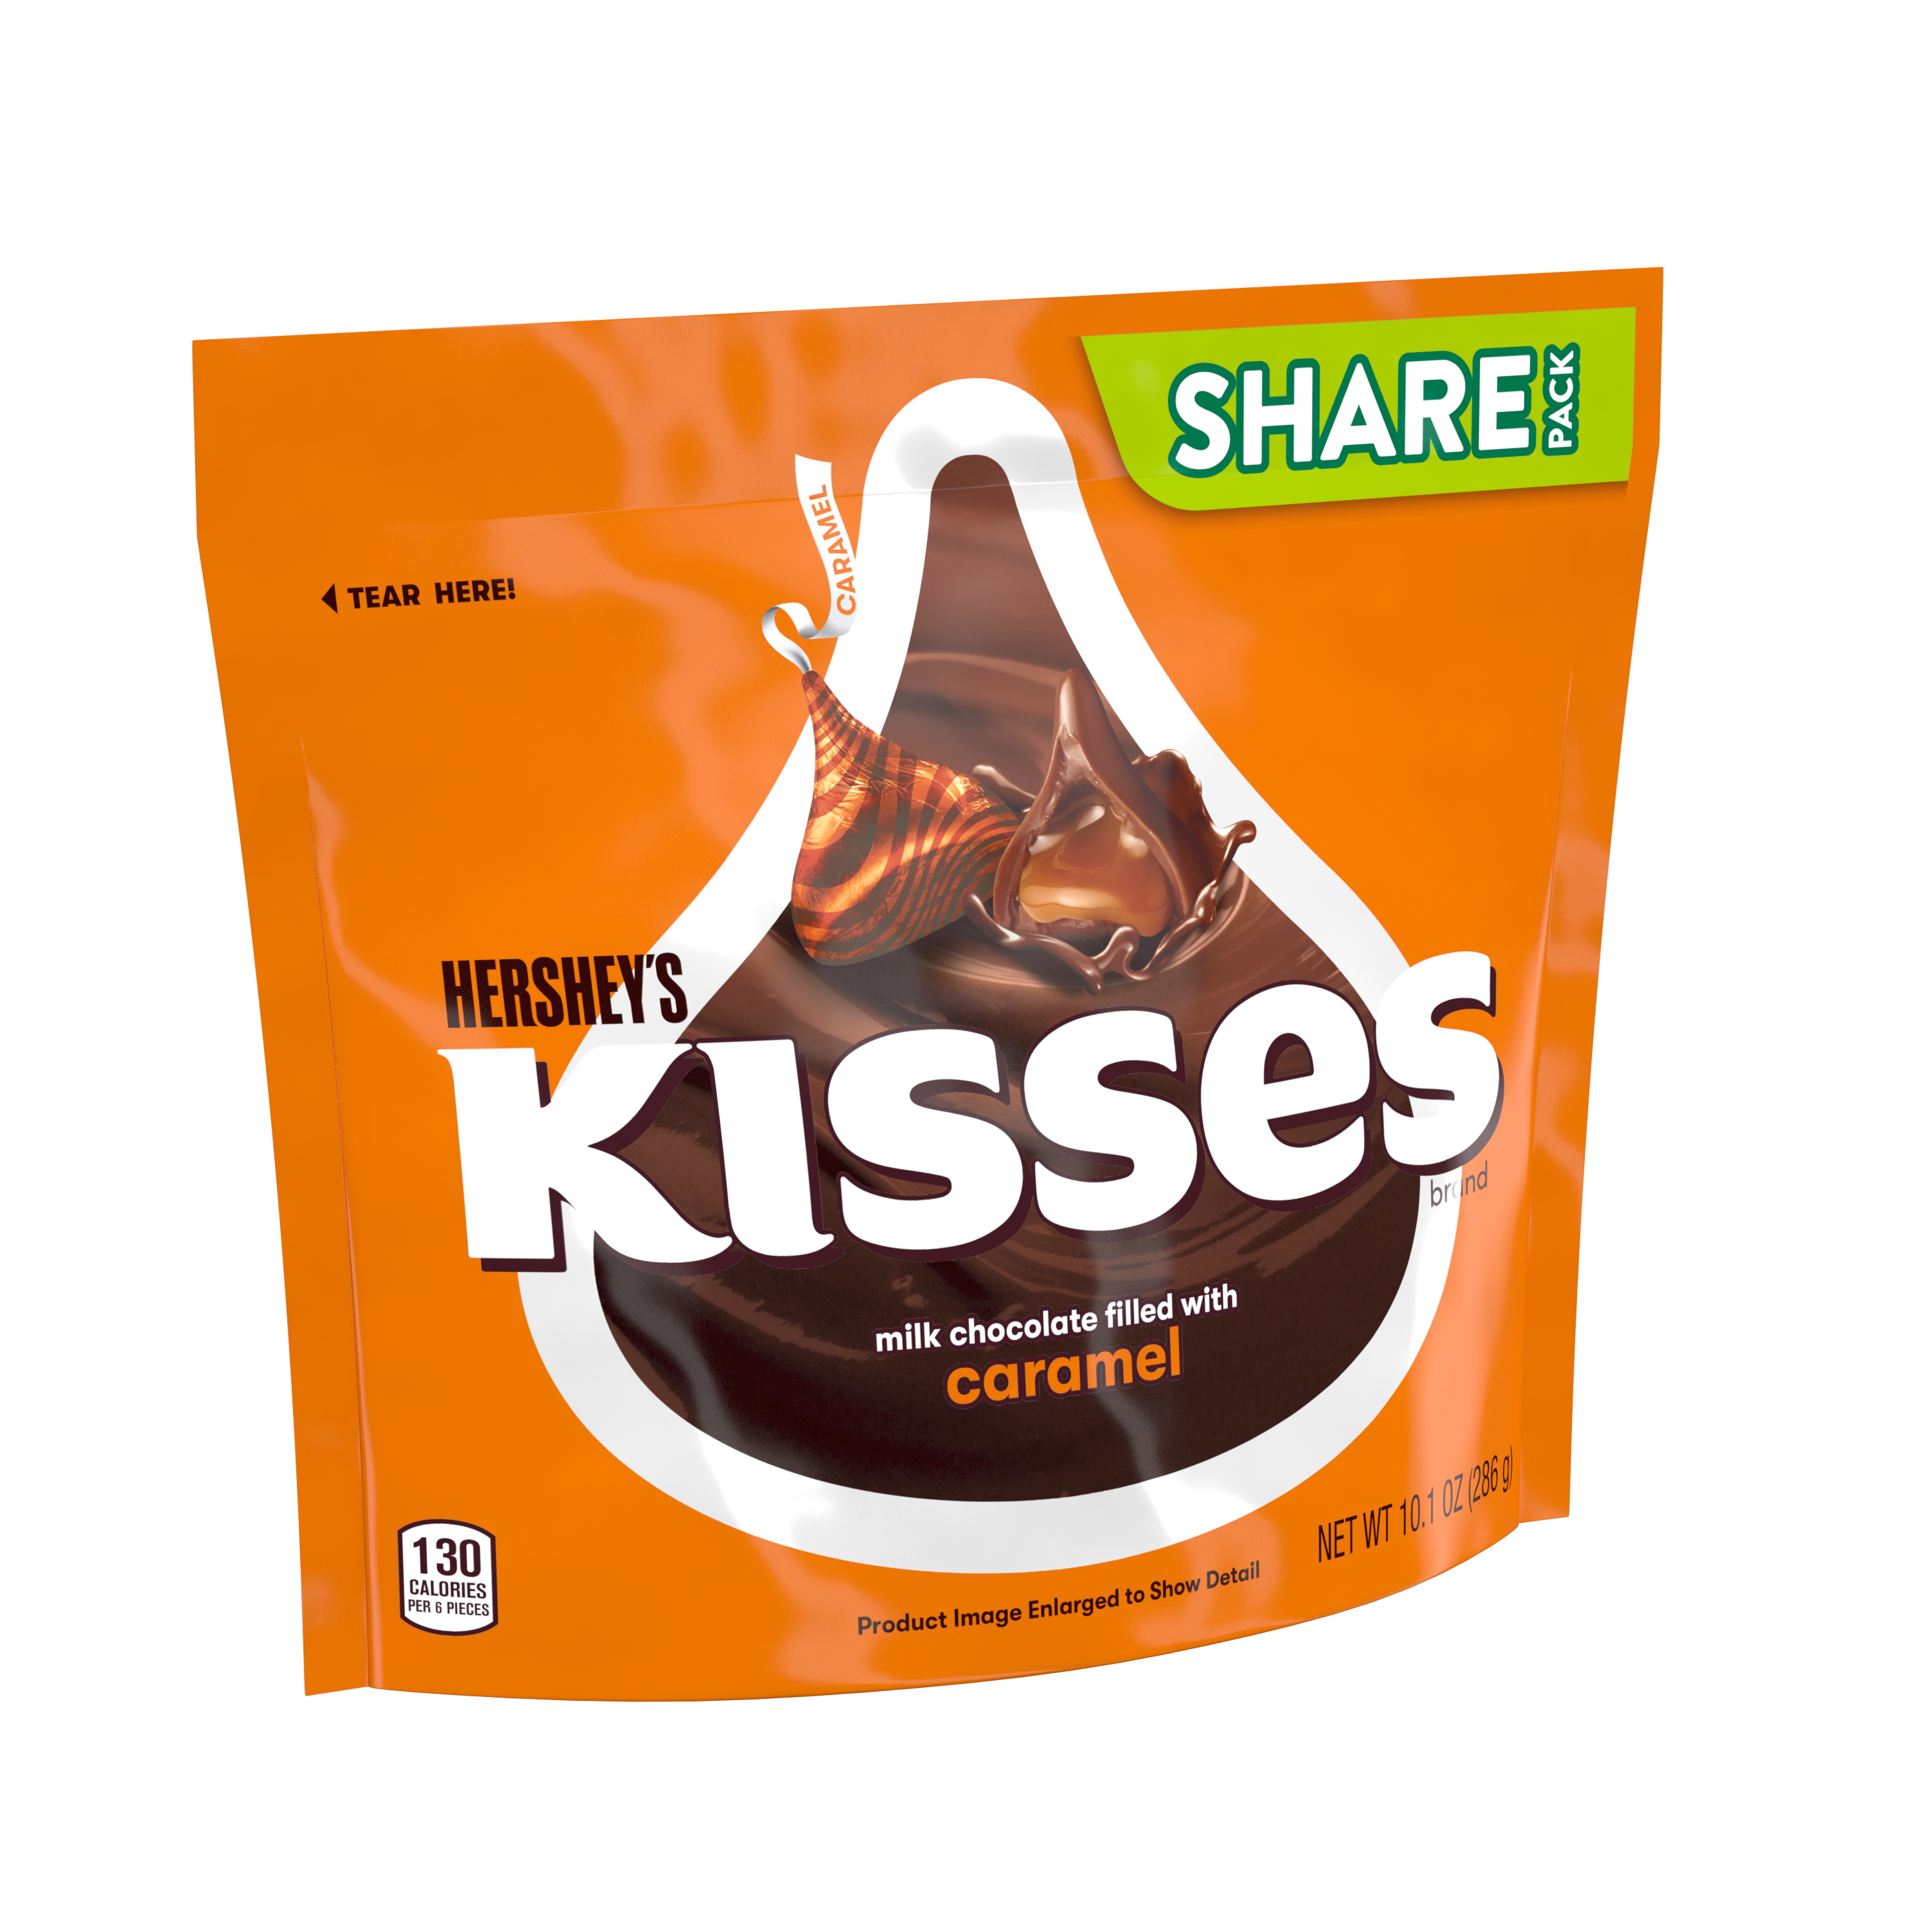 HERSHEY'S KISSES Milk Chocolate Filled with Caramel Candy, 10.1 oz pack - Left Side of Package